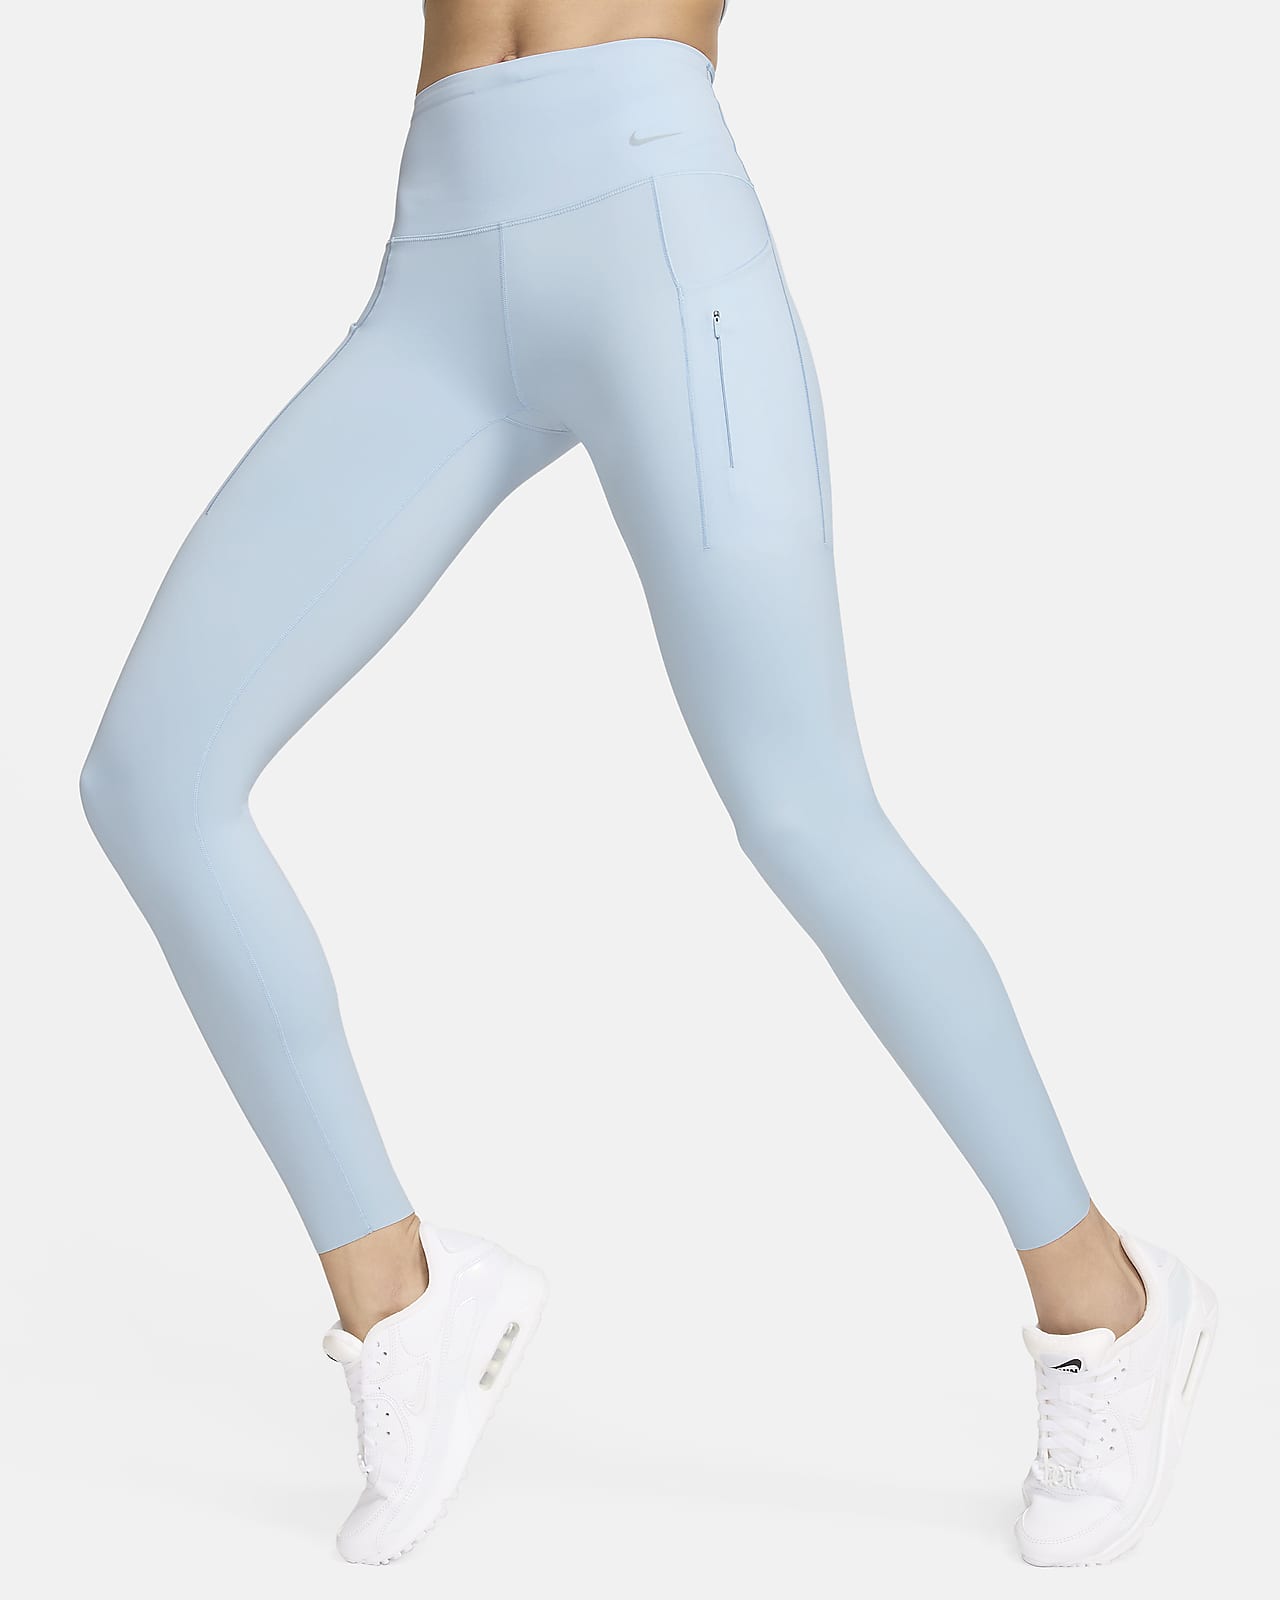 Ultra Low Rise Blue Leggings Leggings for Women Cotton Super Low Rise Yoga  Workout Fitness Full Length Made in USA -  Ireland